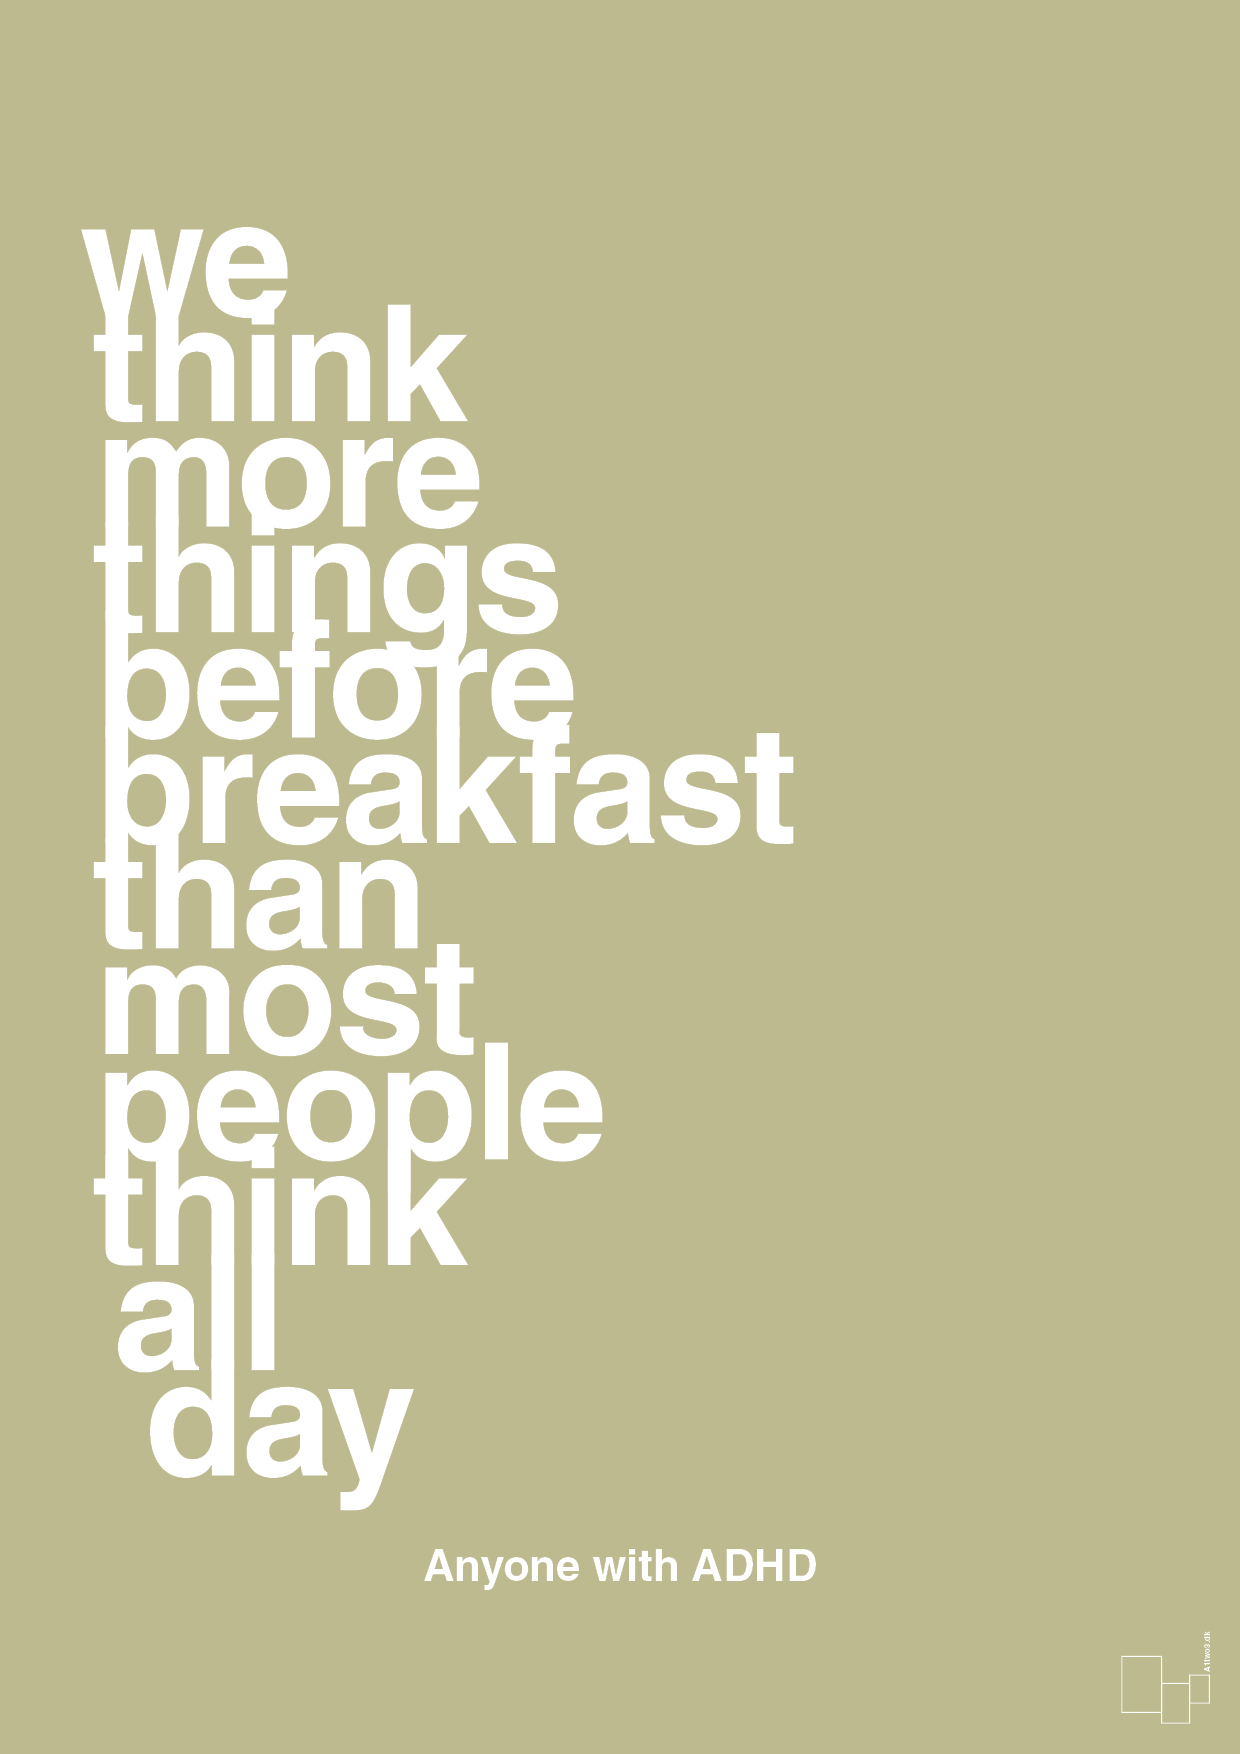 we think more things before breakfast than most people think all day - Plakat med Samfund i Back to Nature